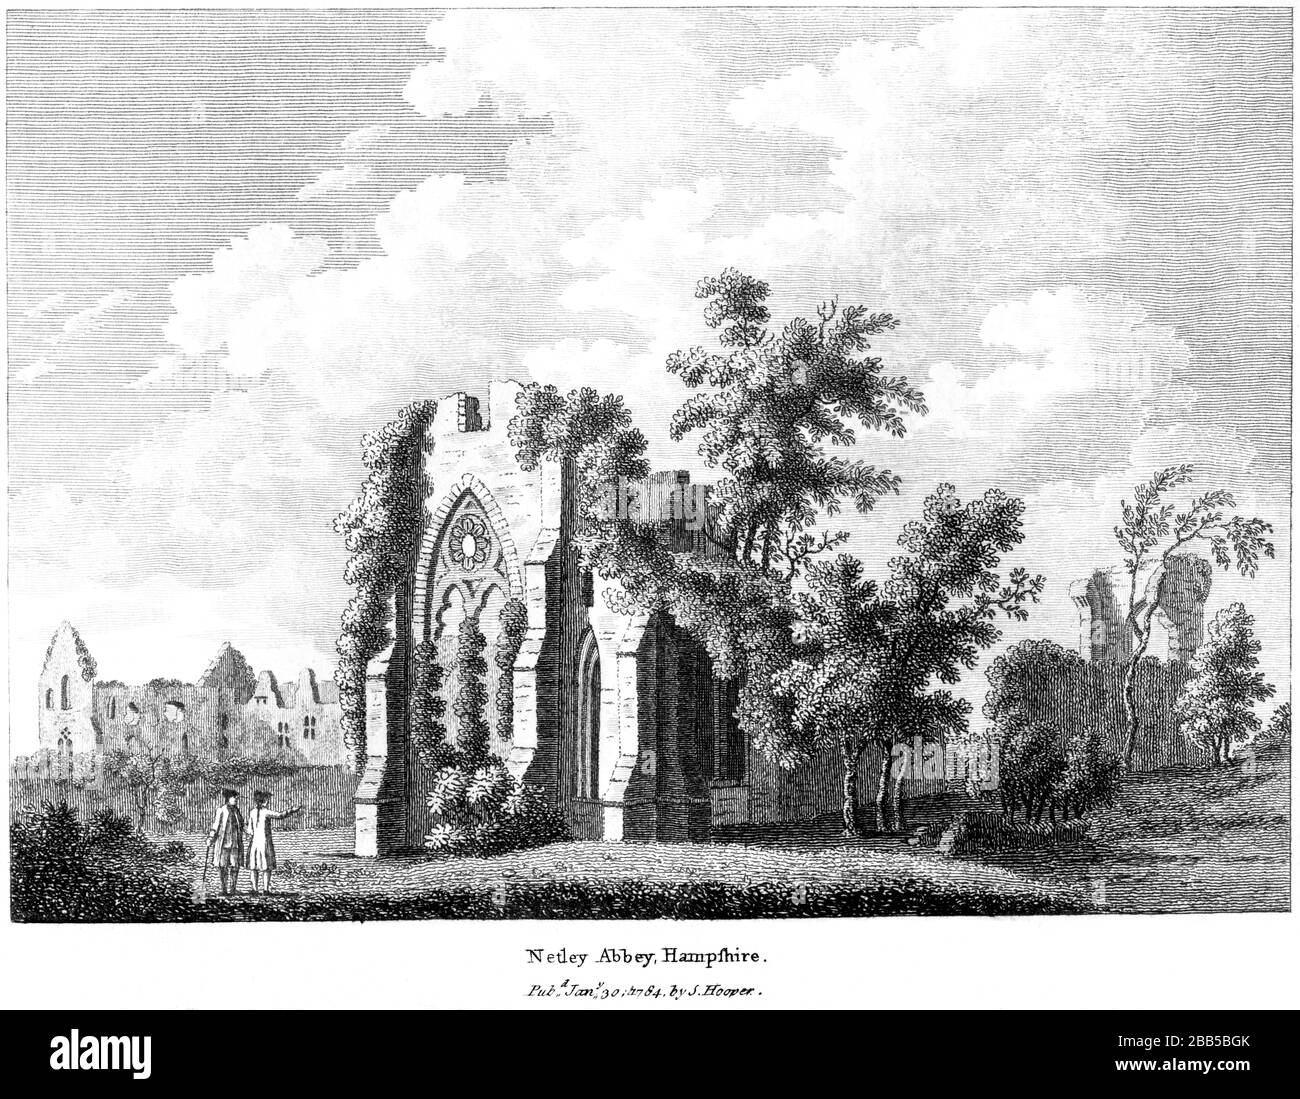 An engraving of Netley Abbey Hampshire 1784 scanned at high resolution from a book published around 1786. Believed copyright free. Stock Photo